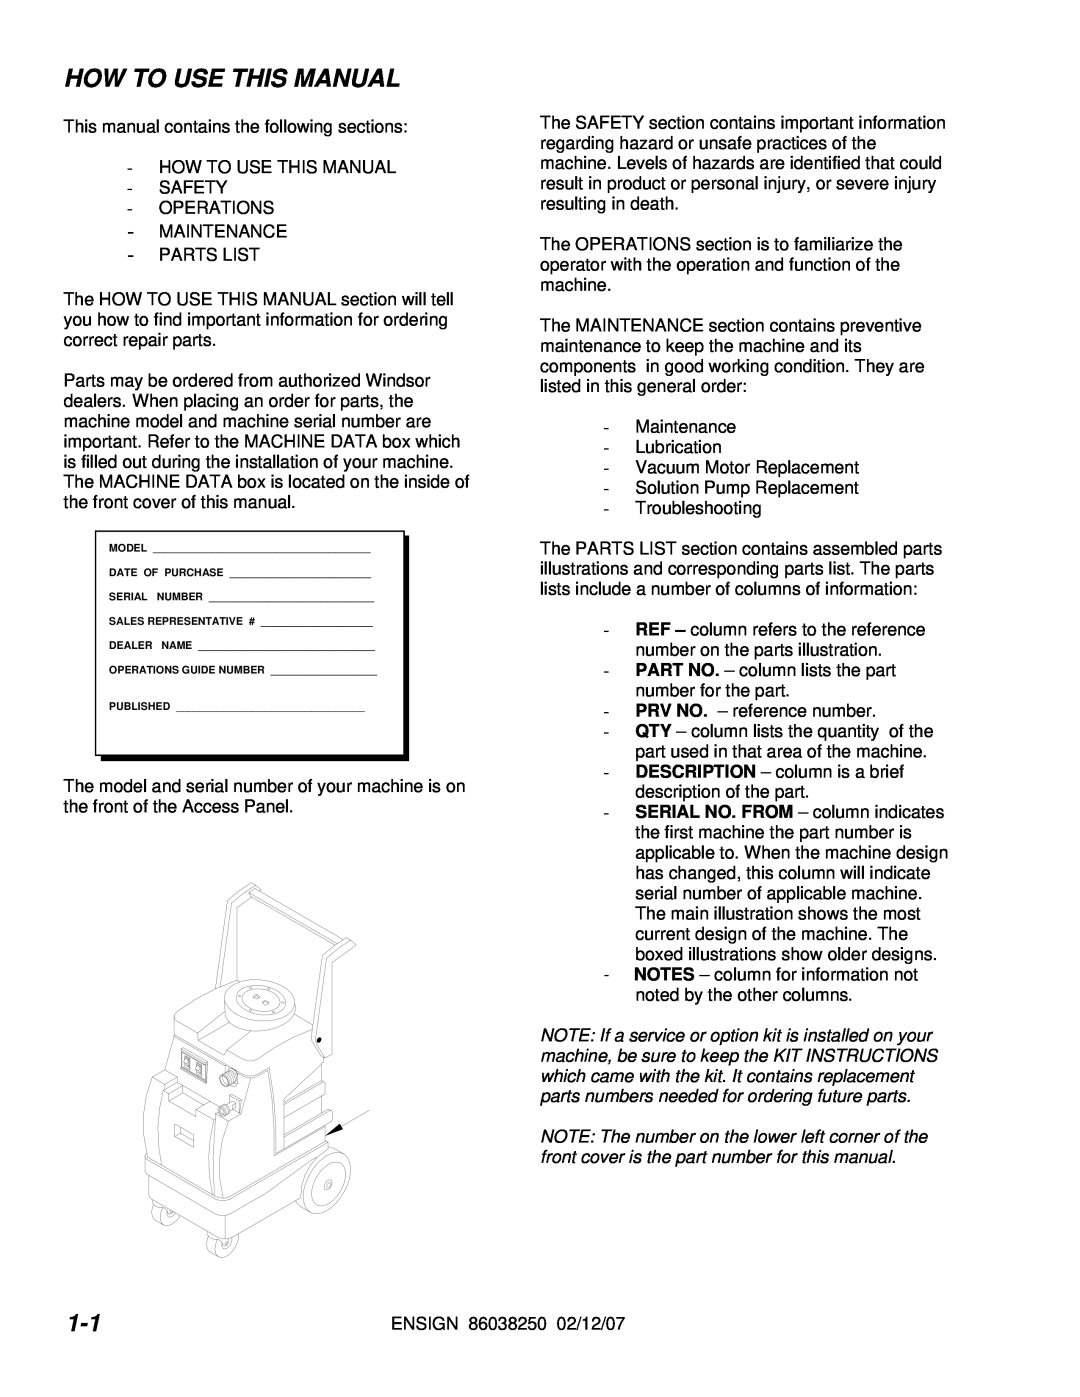 Windsor E50 10070090 operating instructions How To Use This Manual 